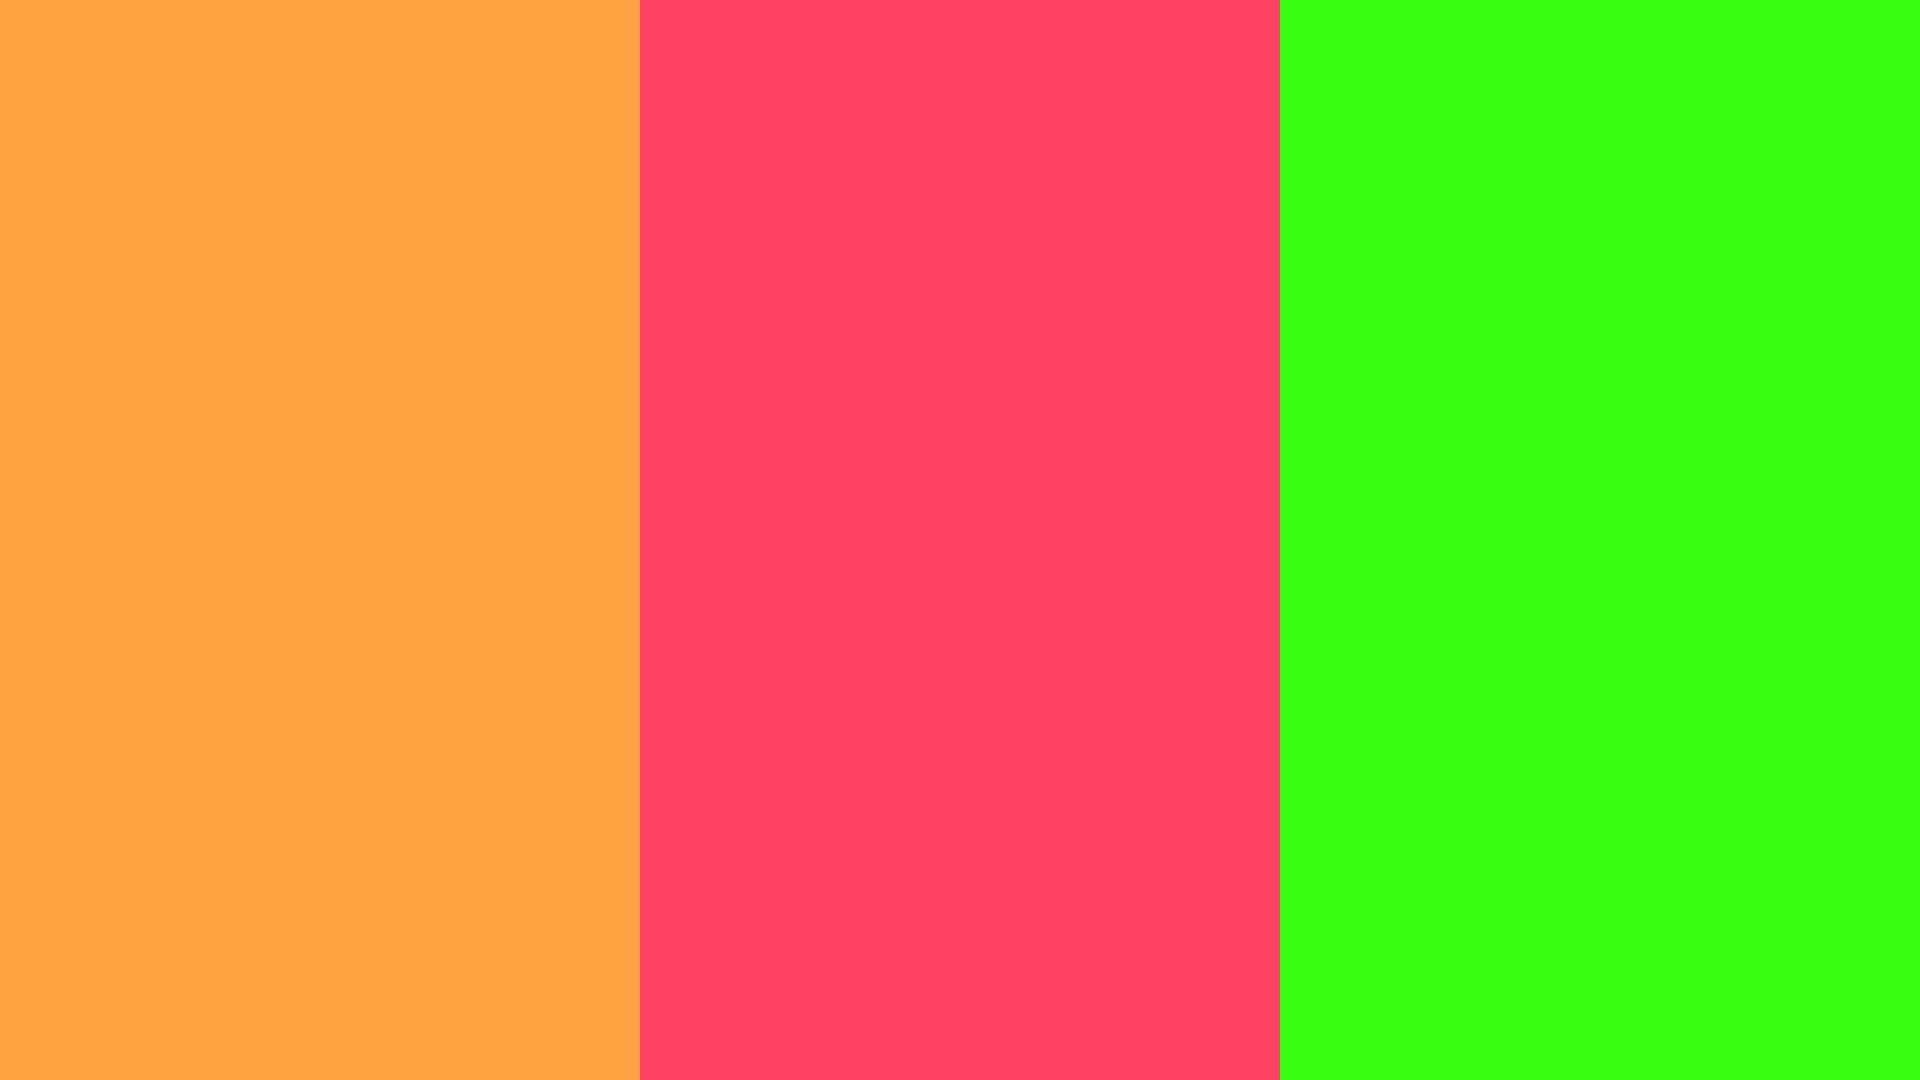 Solid Neon Blue Background Neon carrot neon fuchsia and neon green